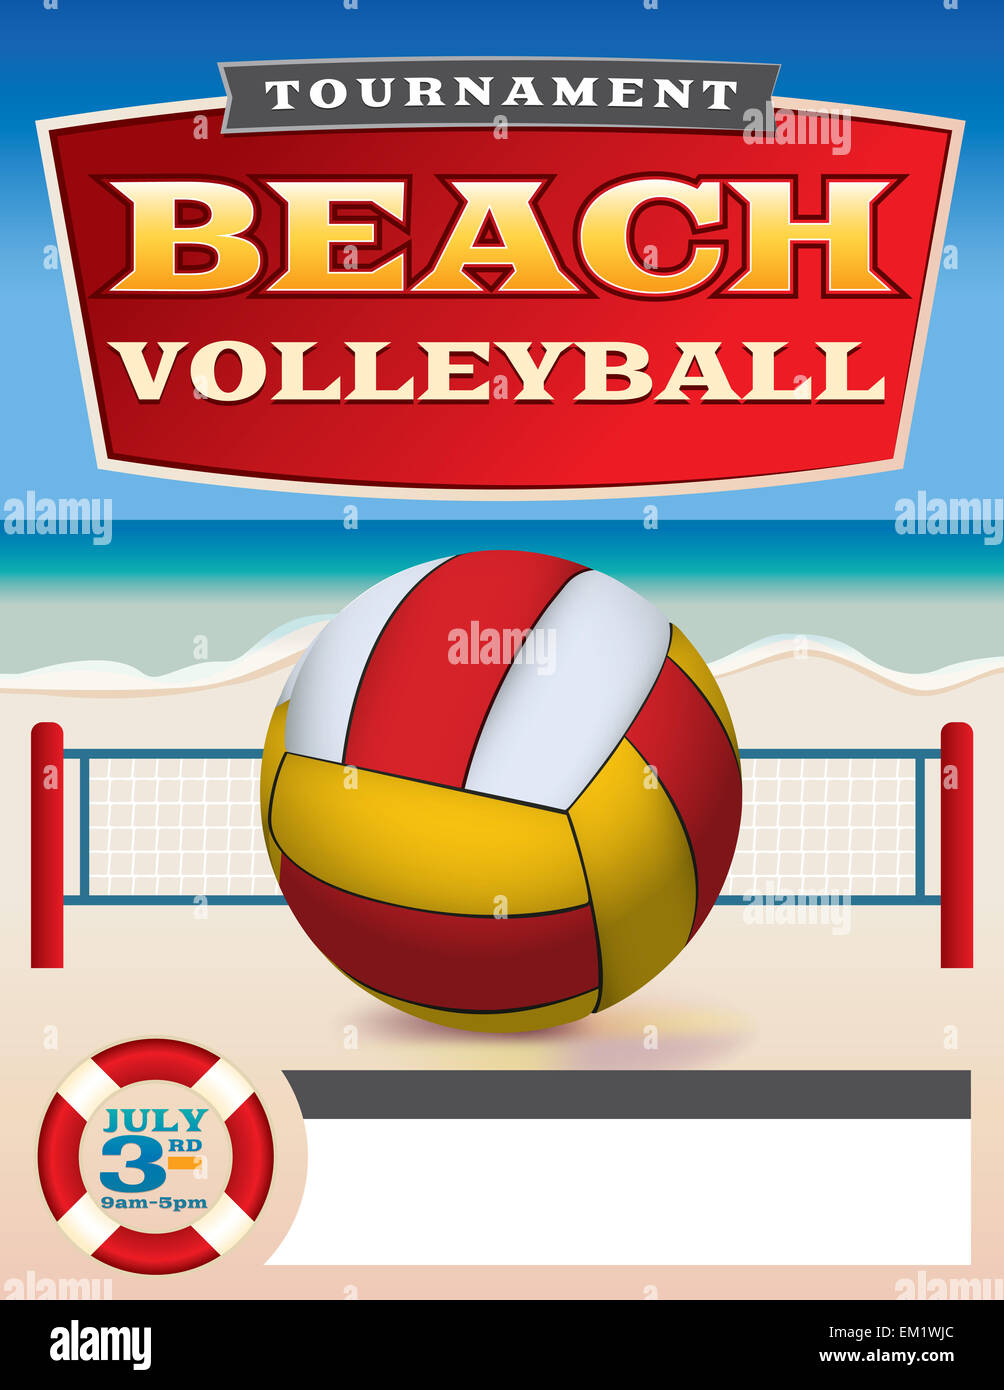 A flyer or poster template for a beach volleyball tournament. Stock Photo